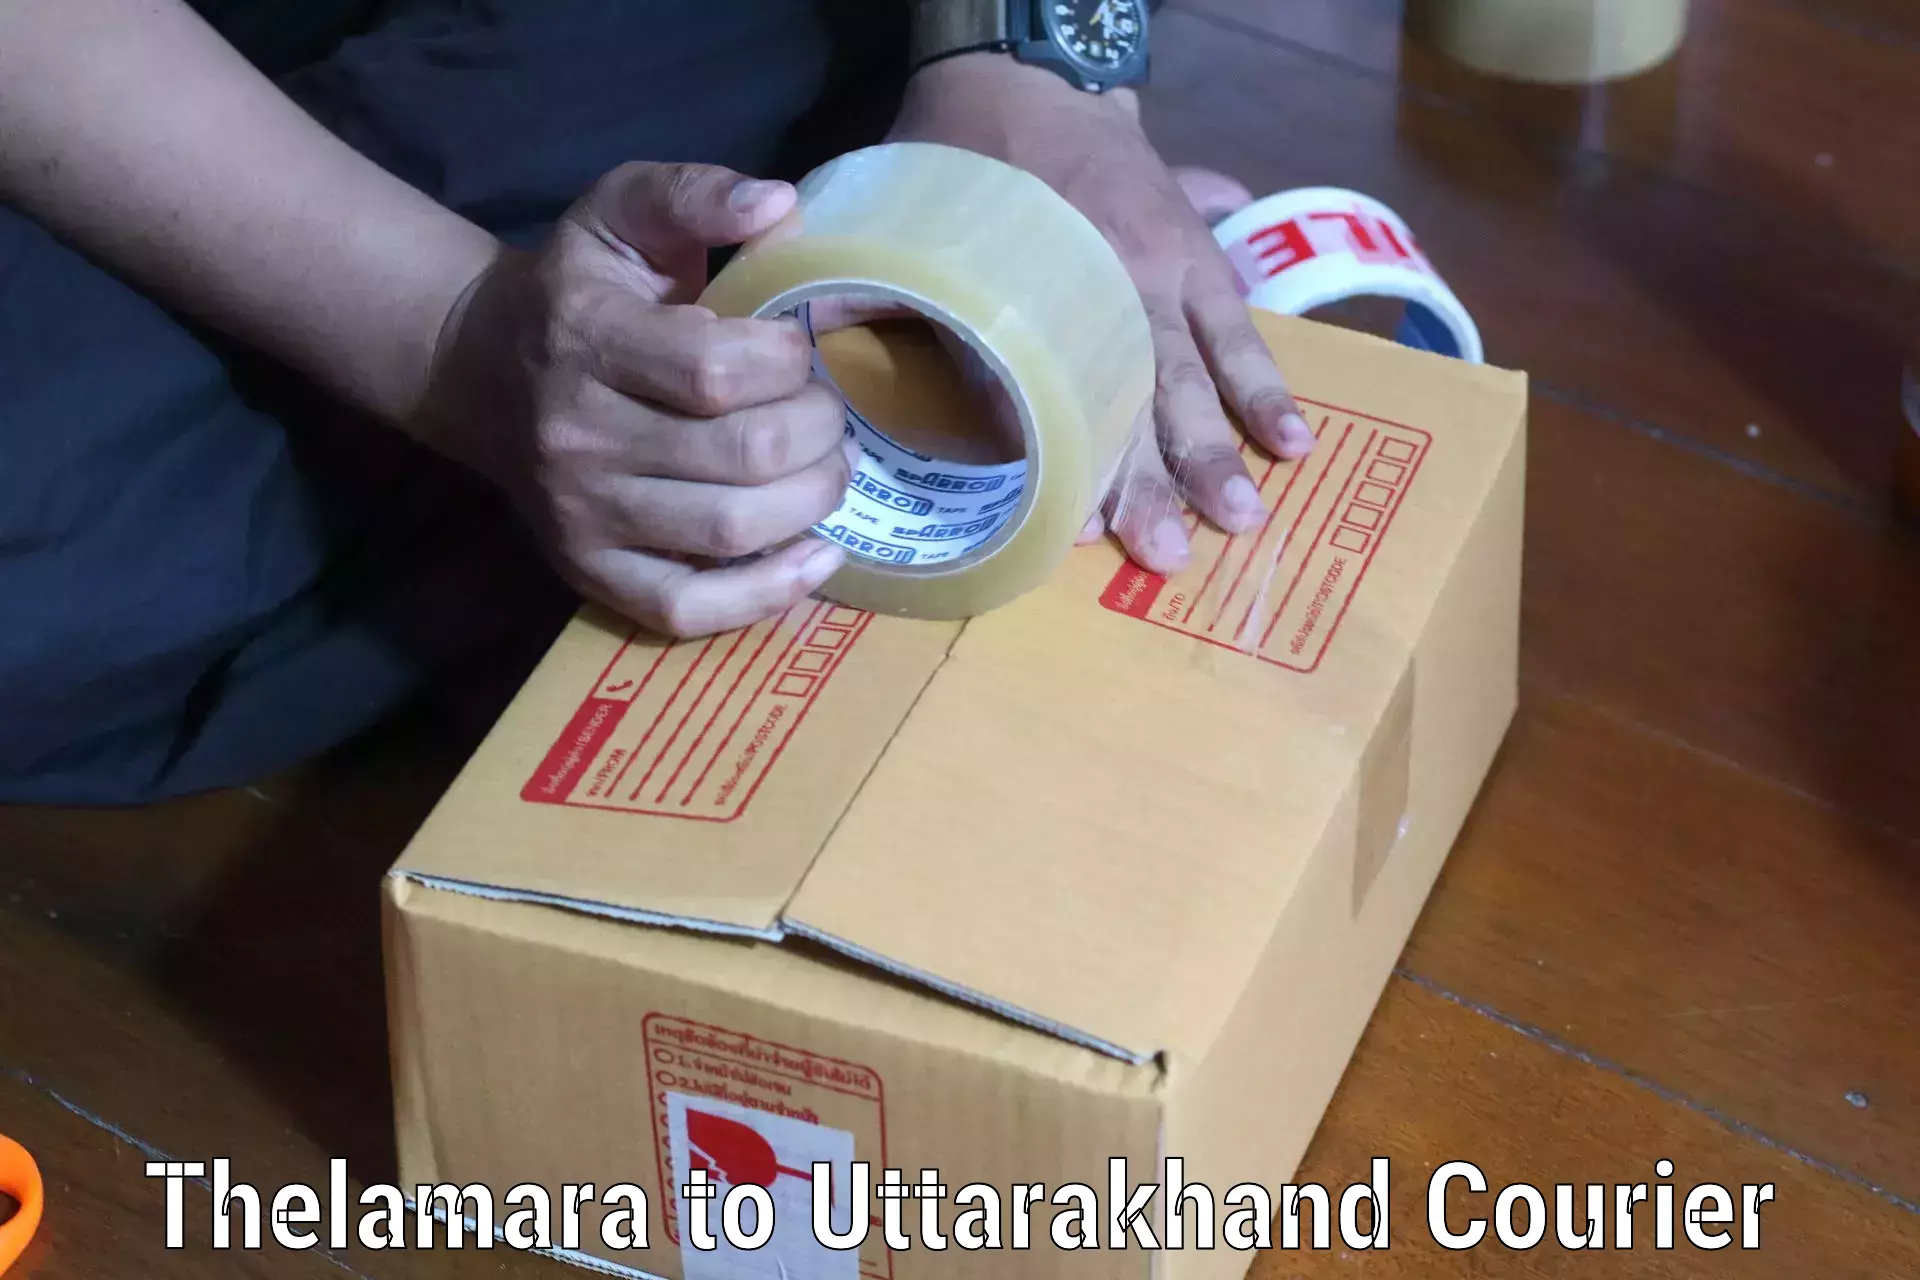 Parcel handling and care in Thelamara to Rudrapur